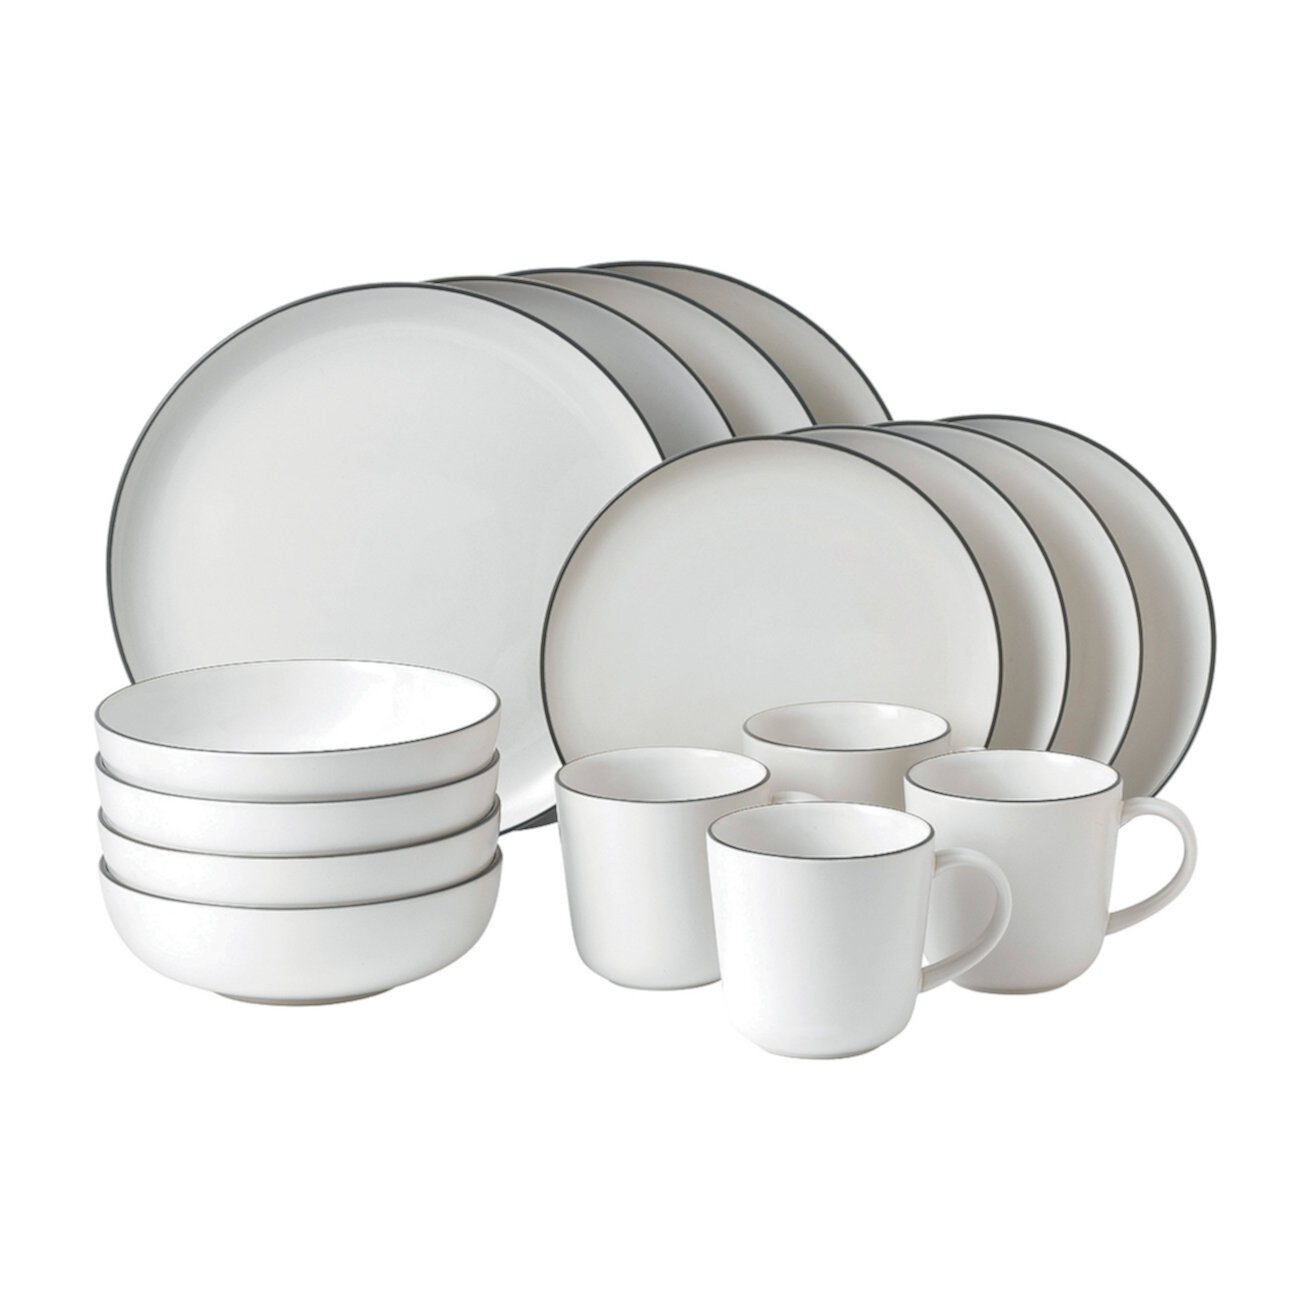 Набор из 16 предметов Royal Doulton Exclusively for Bread Street White Royal Doulton